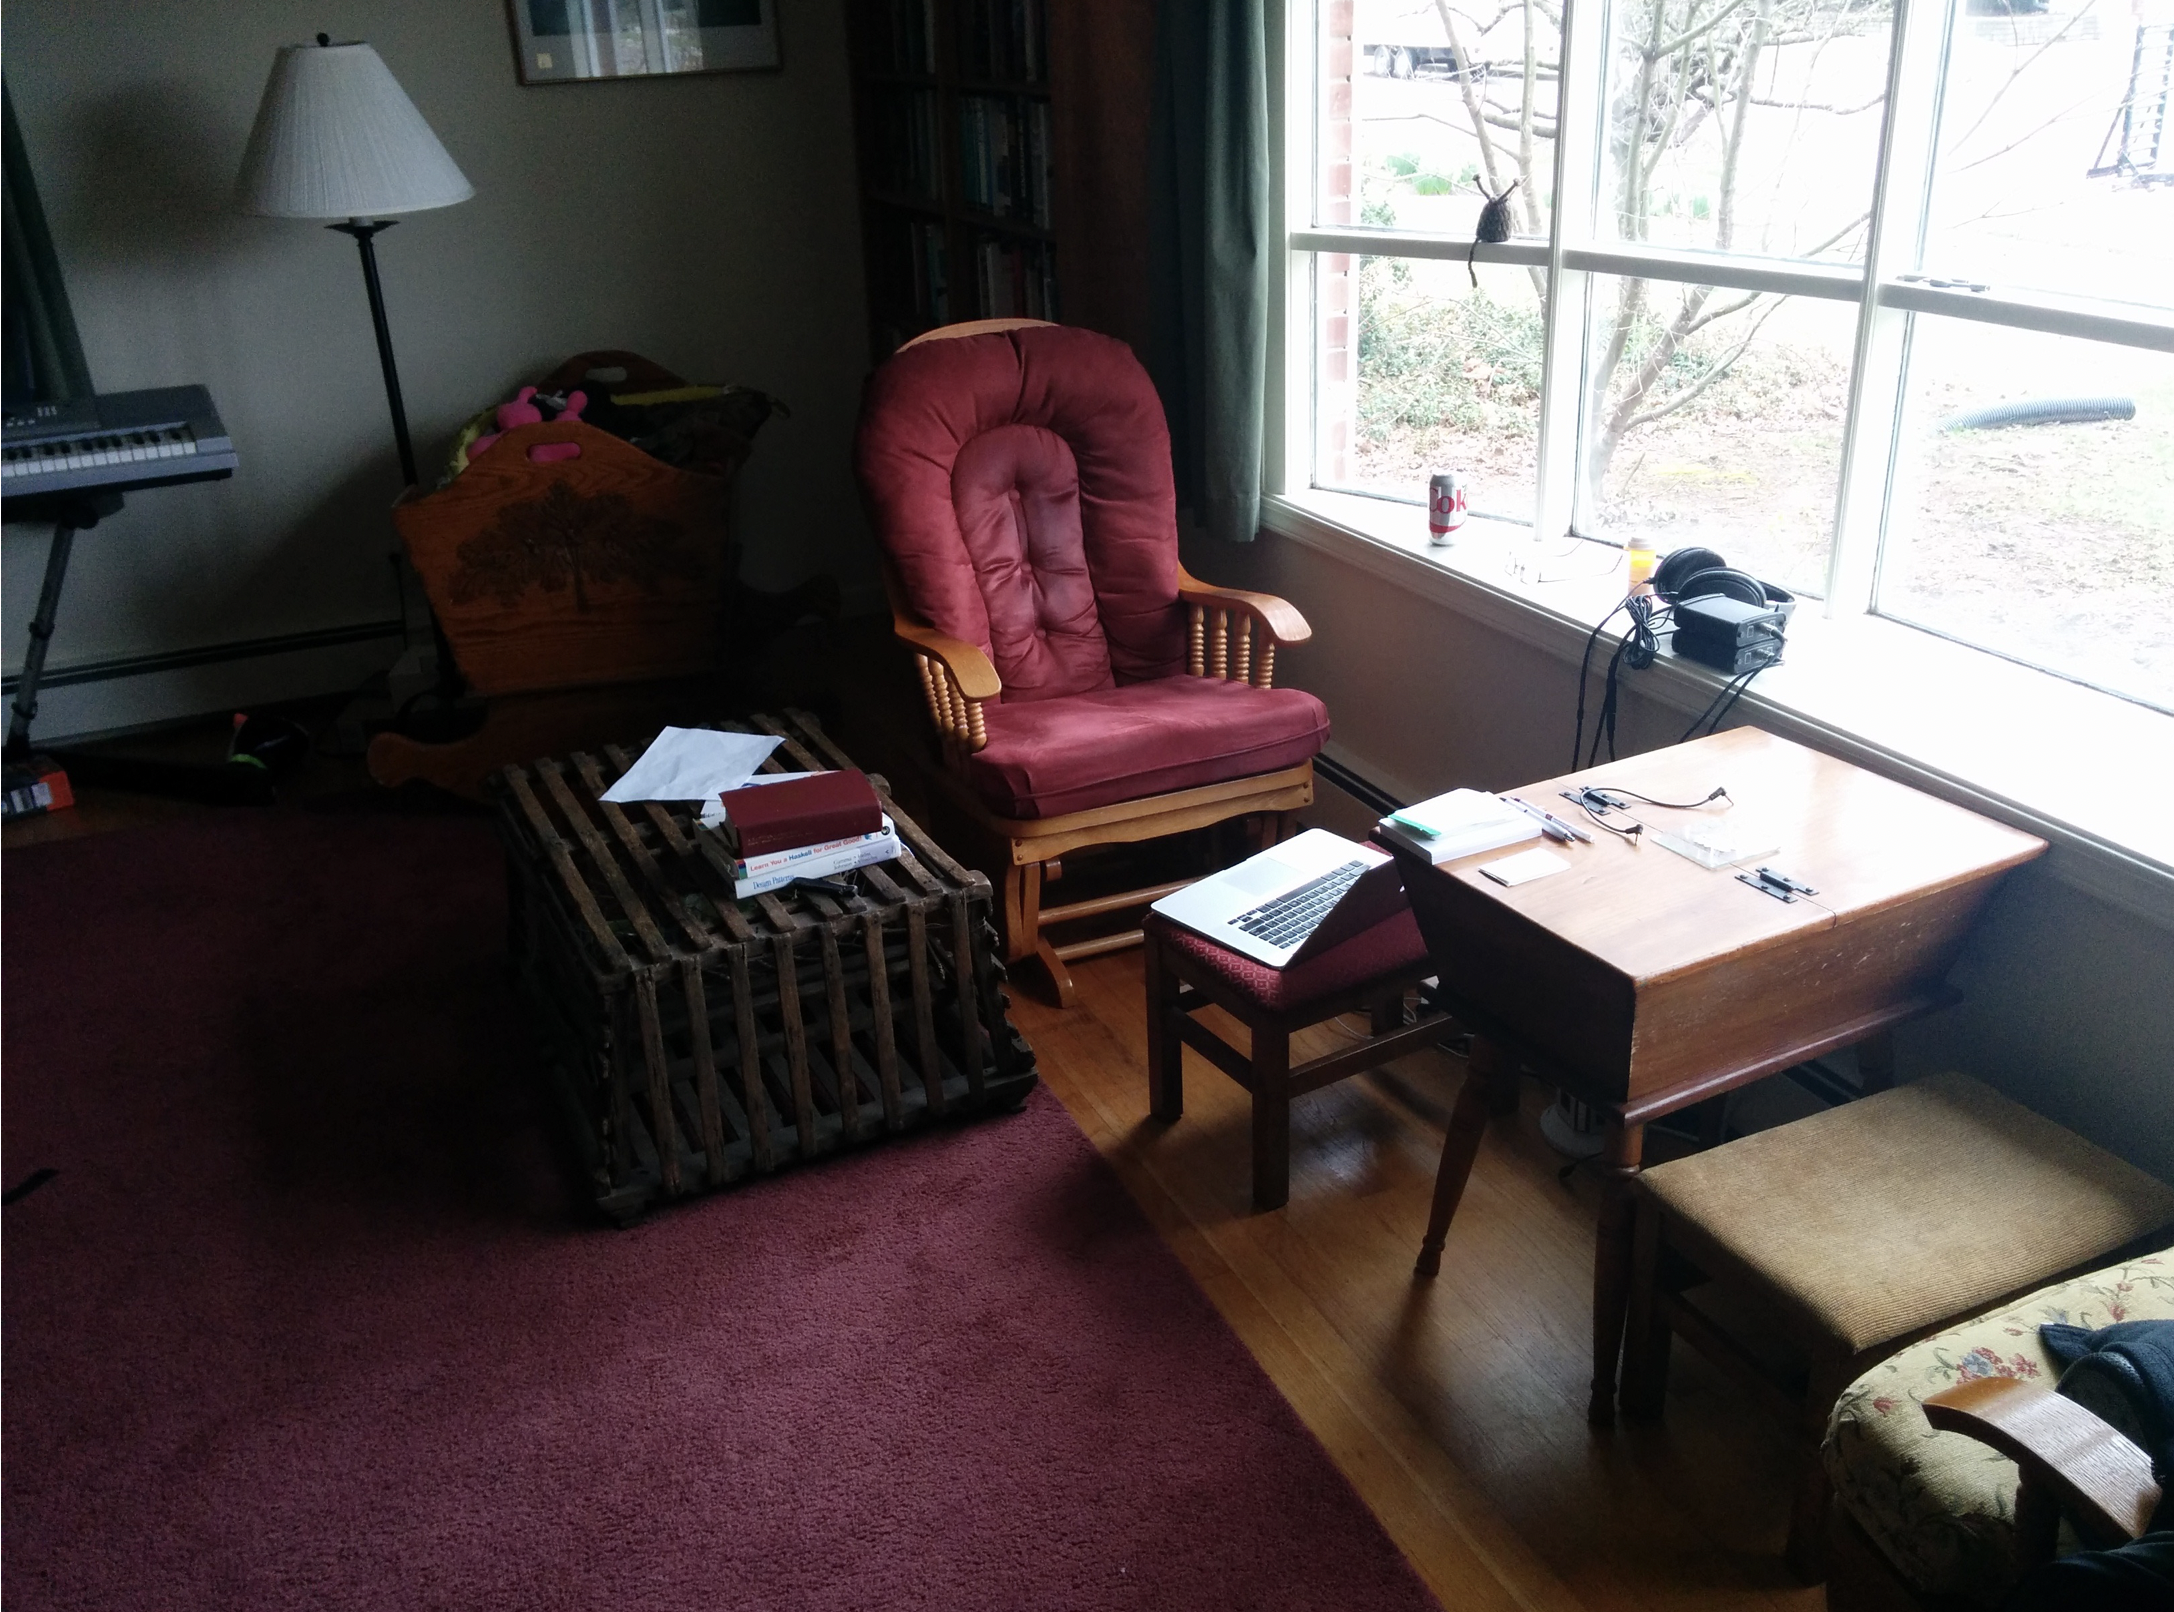 We are looking toward a chair. On our right is a bay window. In front is a low table. To the left is a lobster trap with books on it.